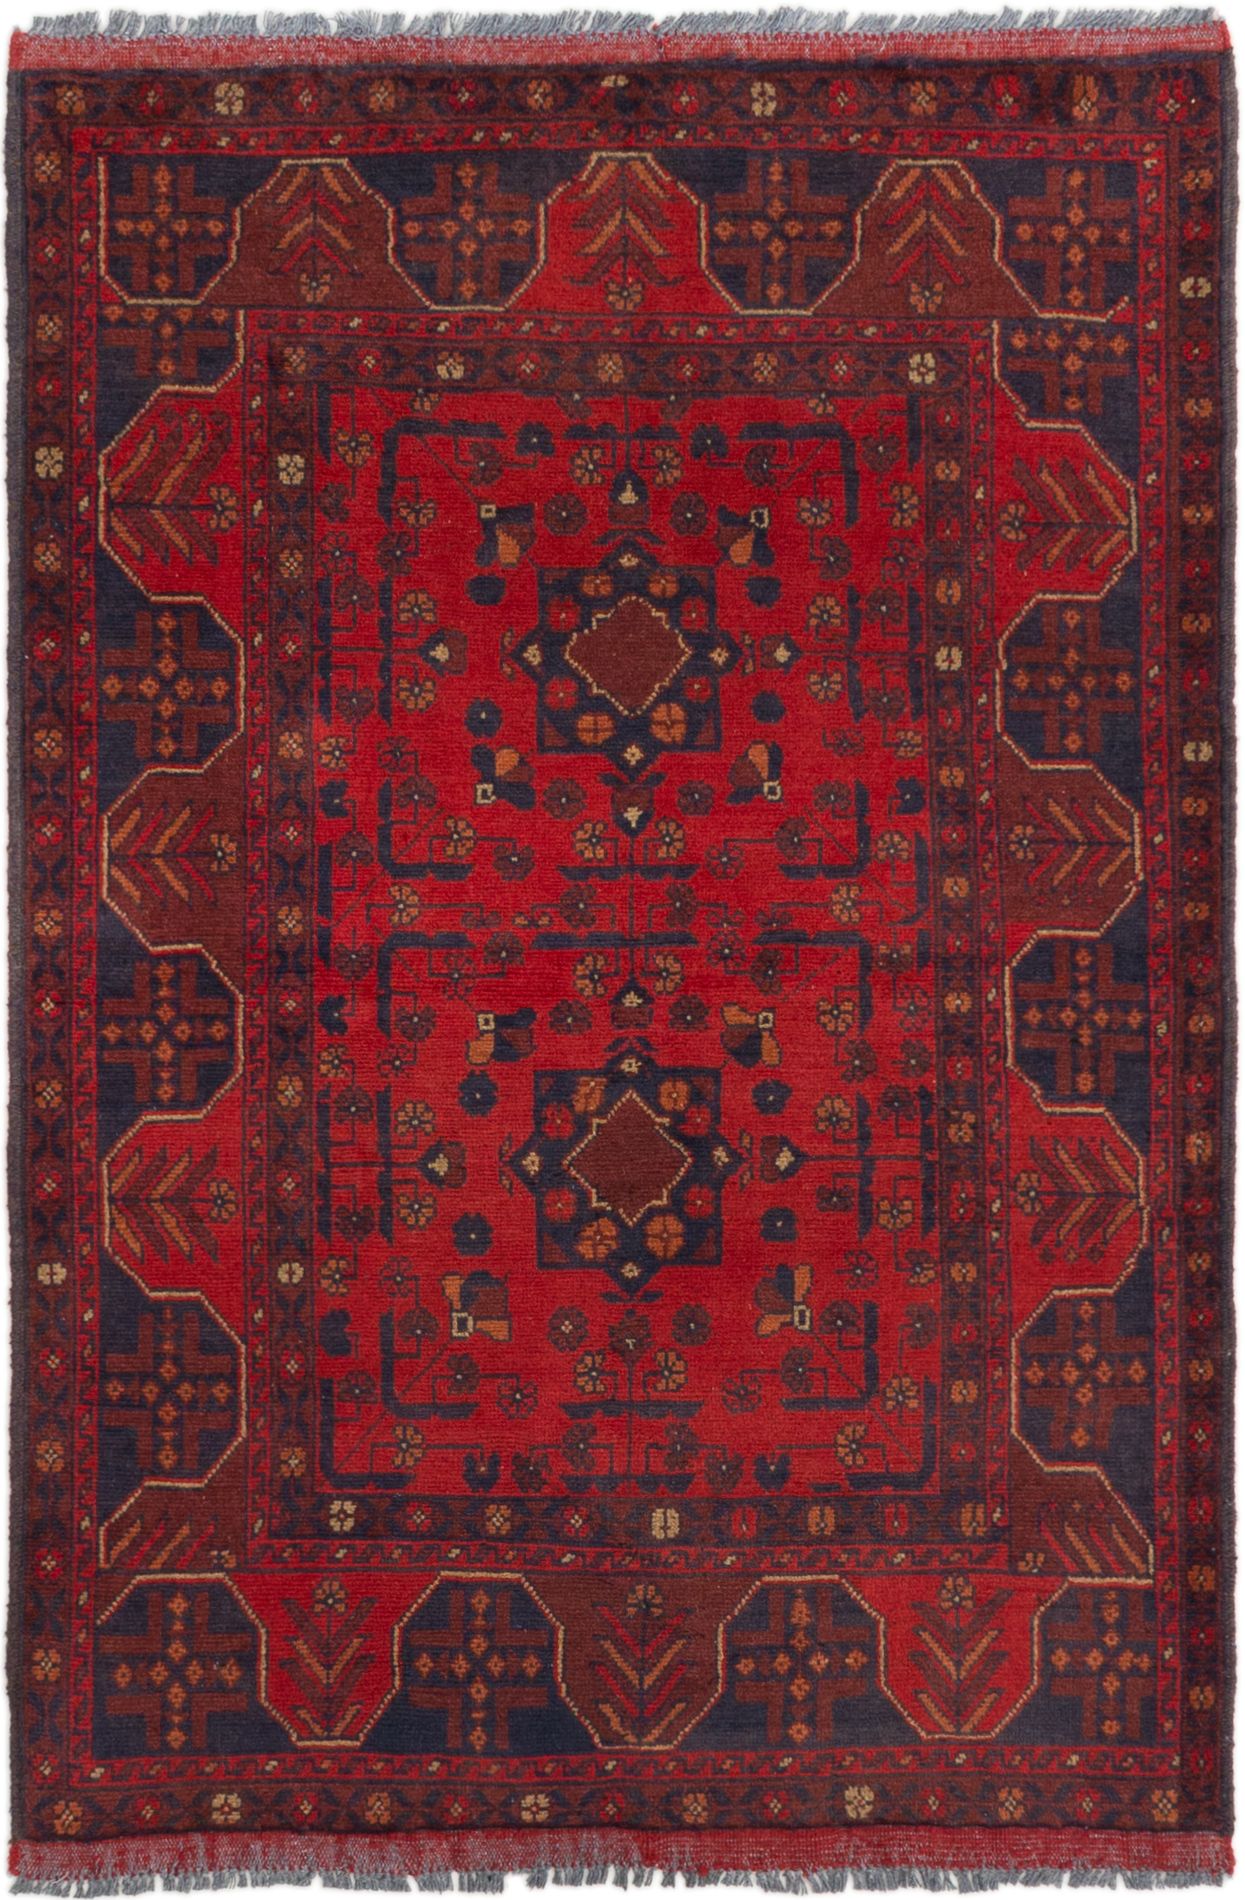 Hand-knotted Finest Khal Mohammadi Red Wool Rug 3'4" x 4'11" (16) Size: 3'4" x 4'11"  